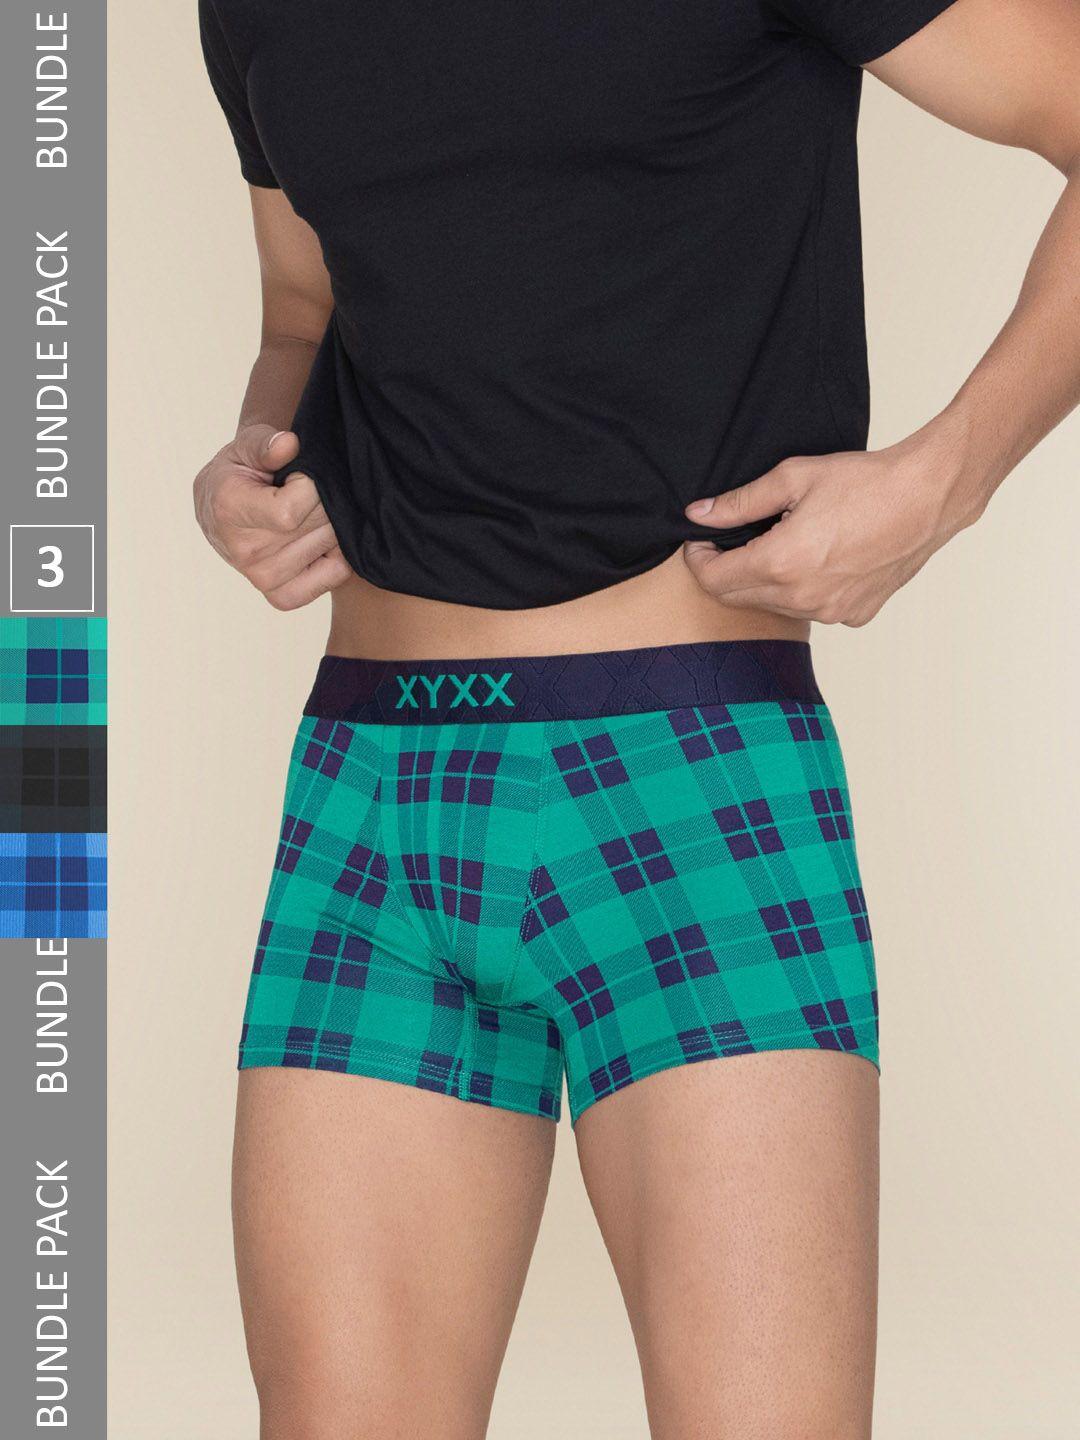 xyxx pack of 3 cotton checked trunks xytrnk3pckn985